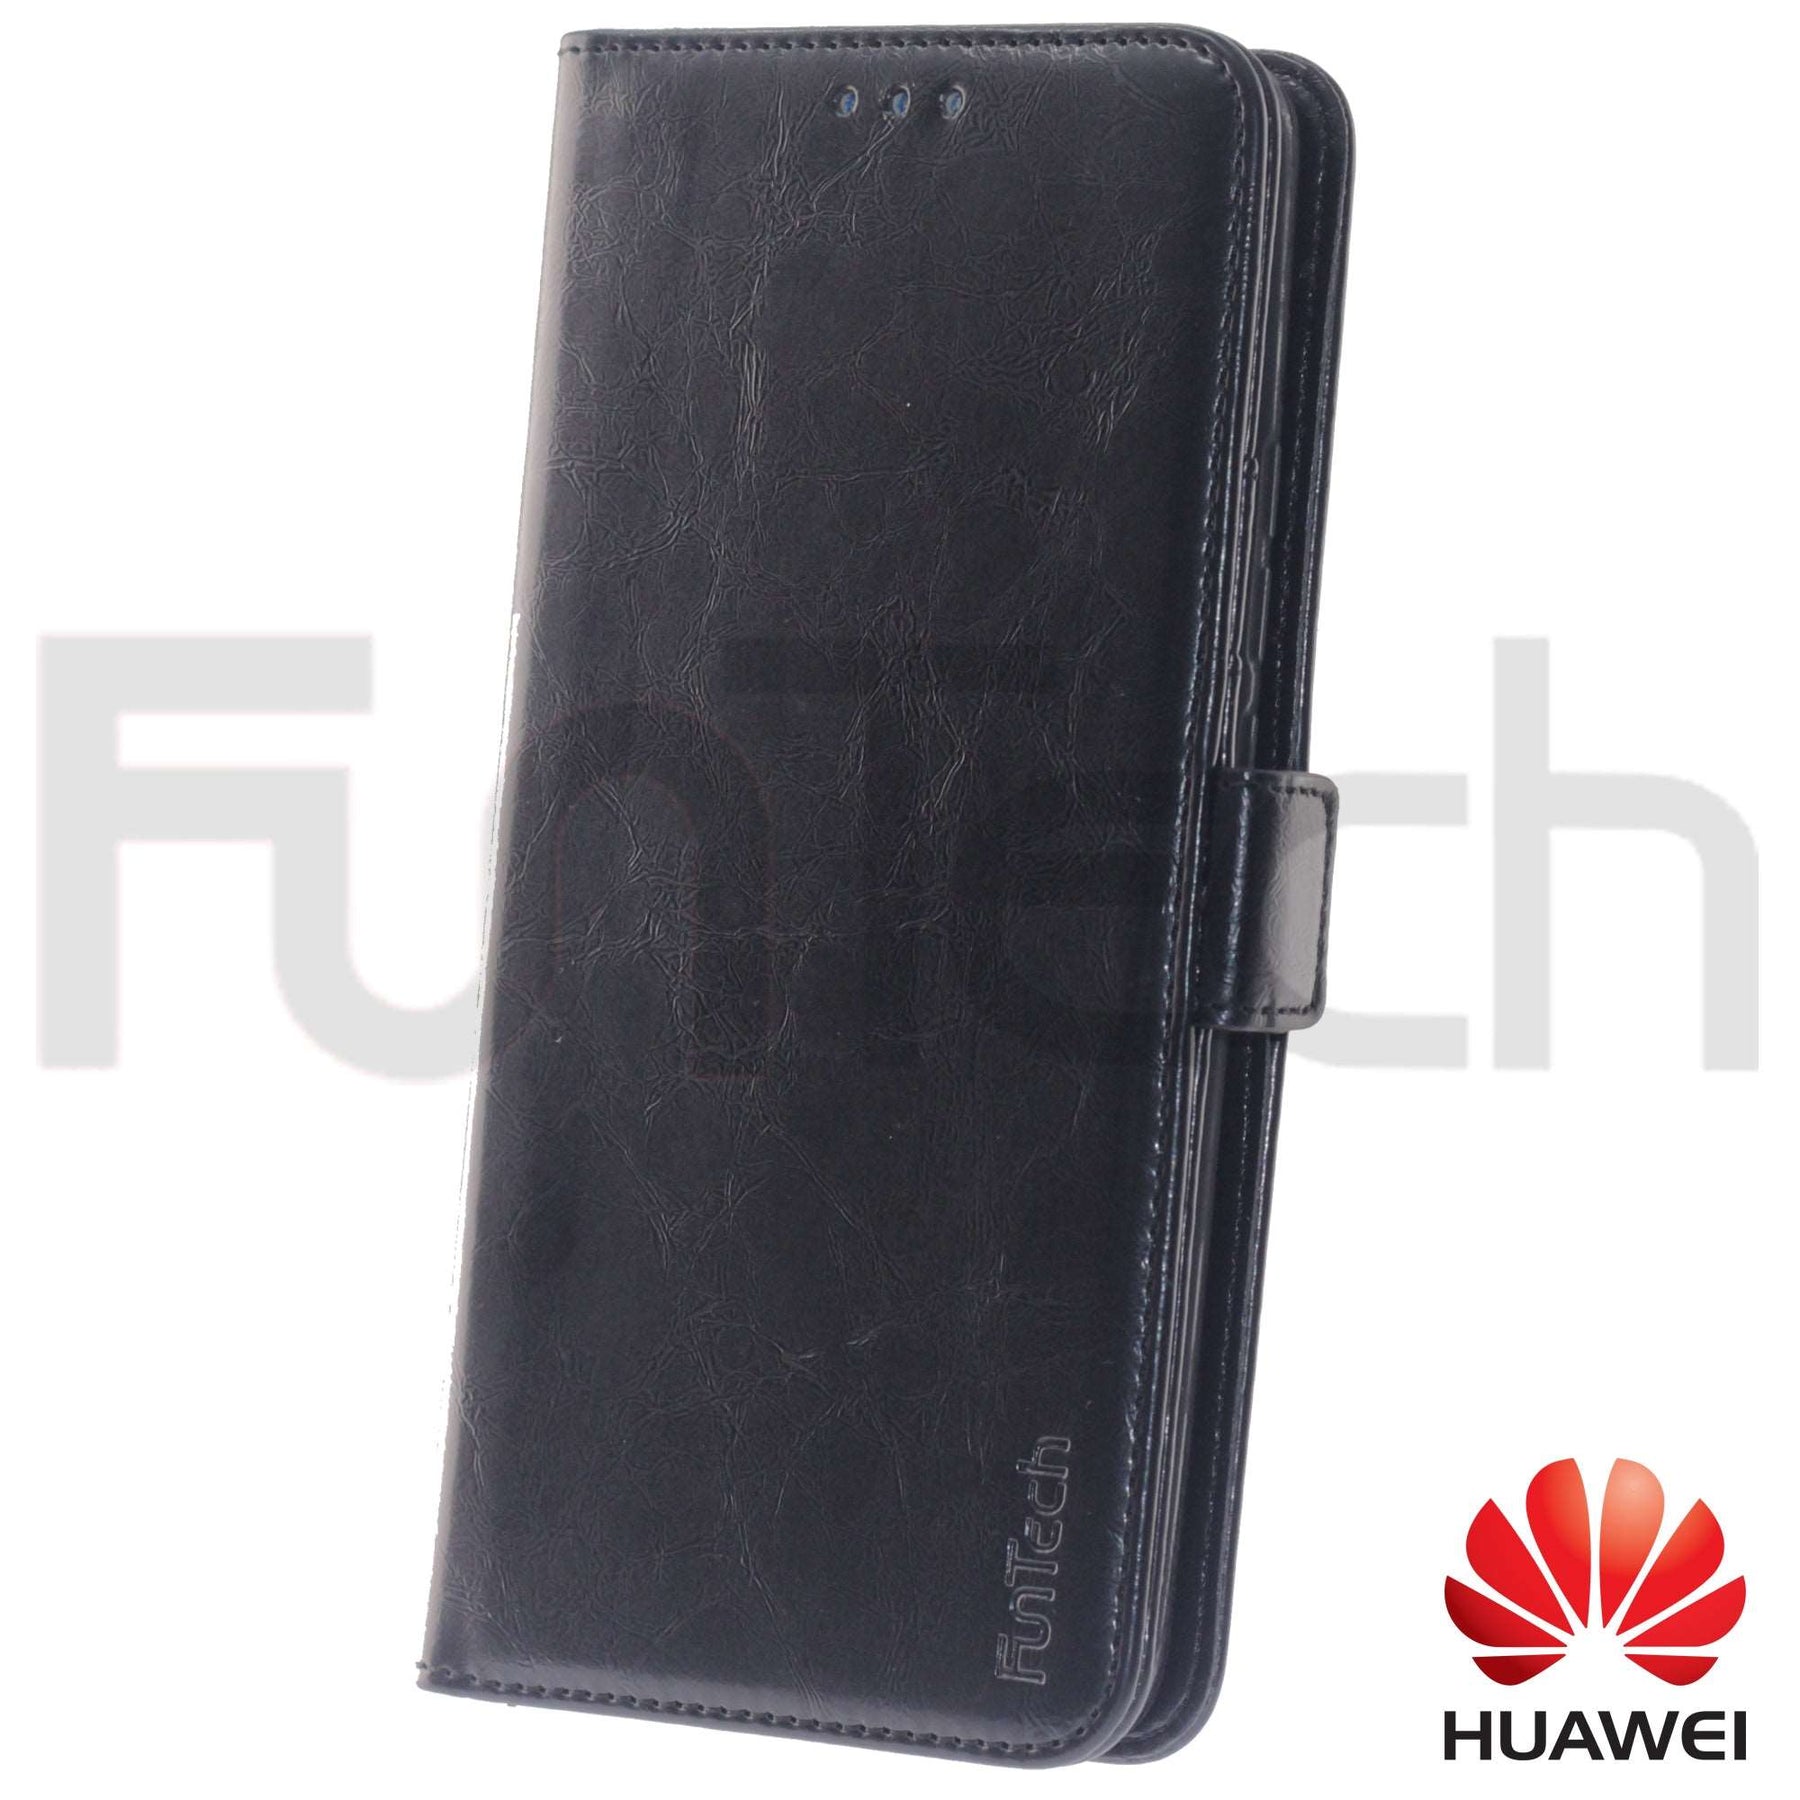 Huawei Mate 20 Pro, Leather Wallet Case, Color Black,